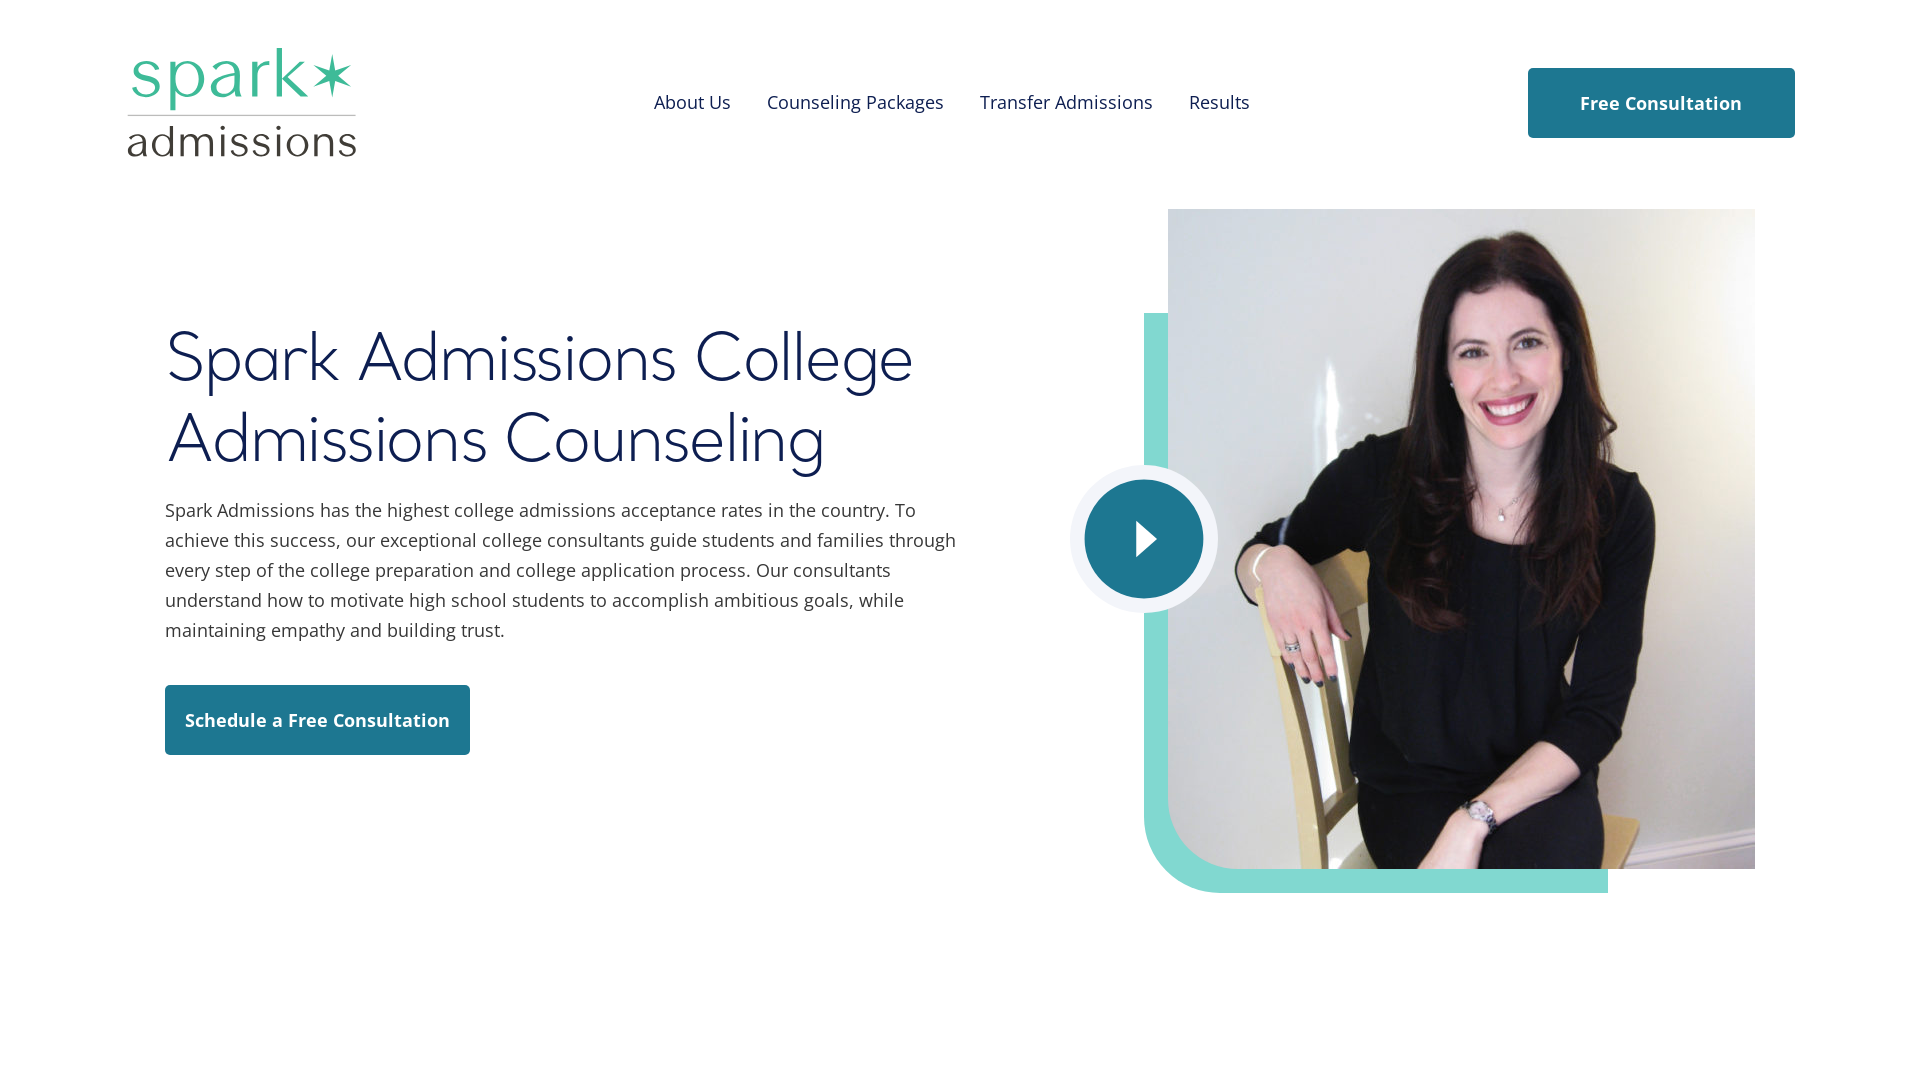 Spark Admissions